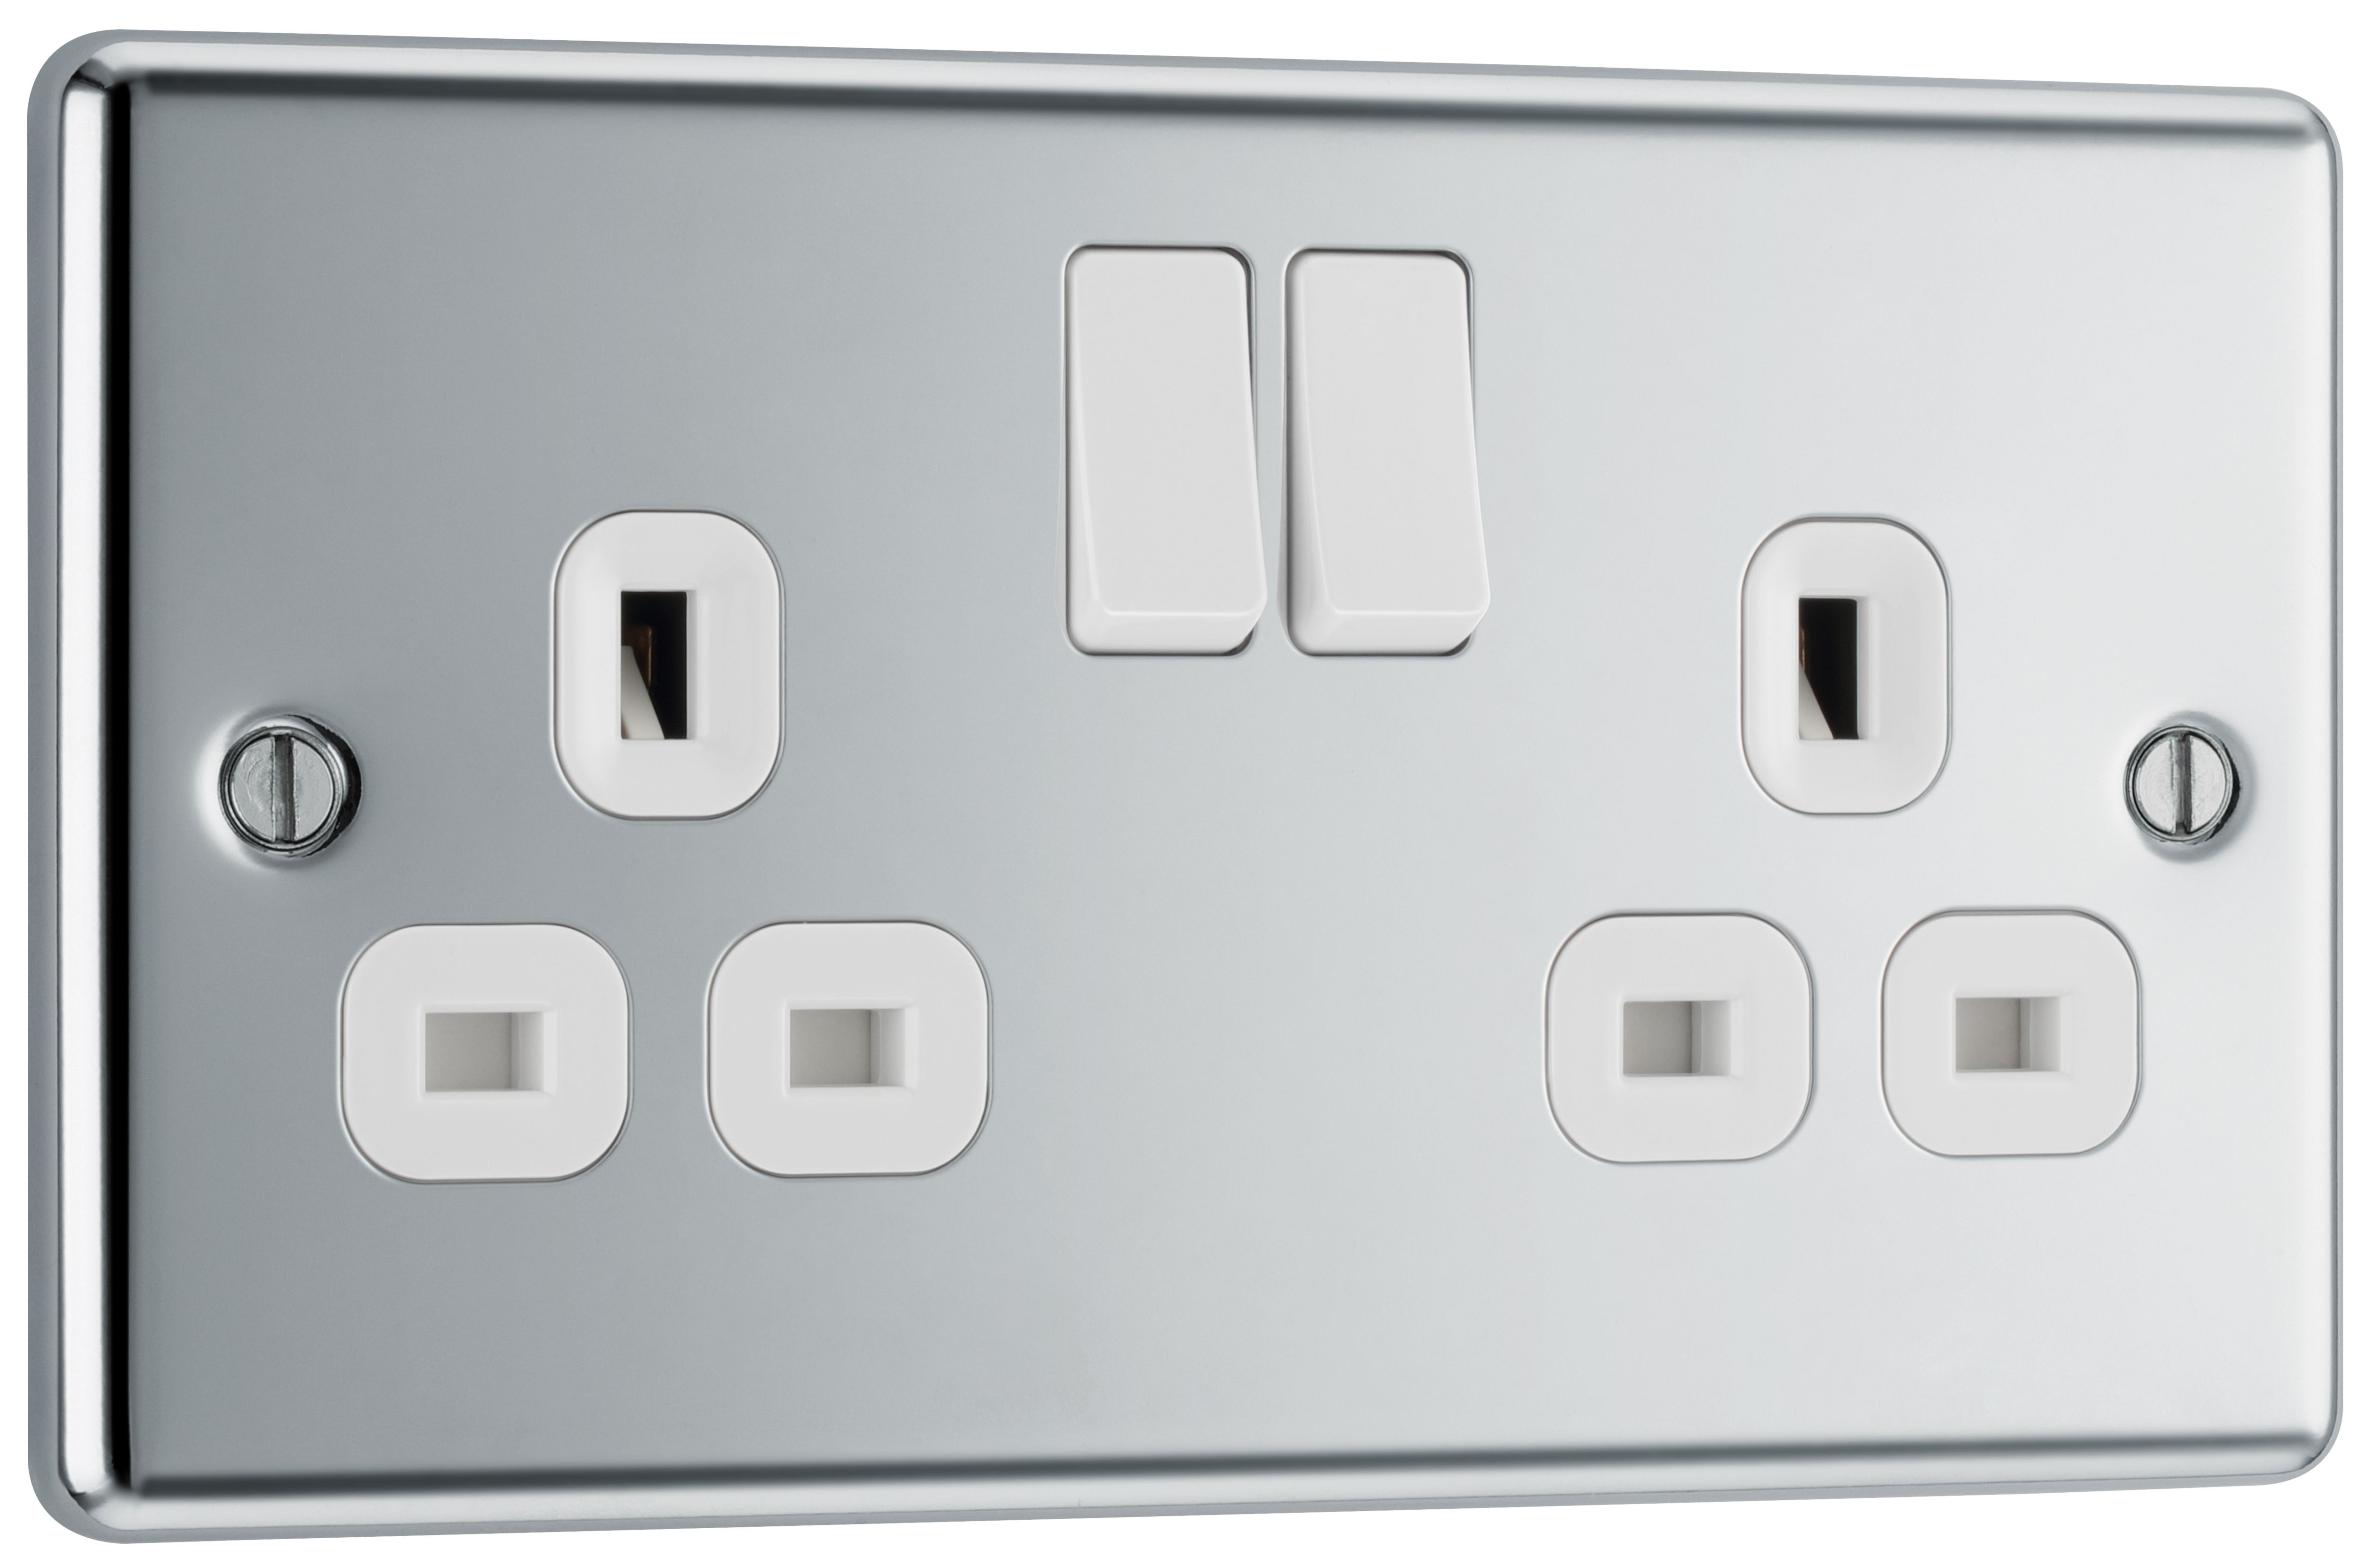 GoodHome Chrome effect Double 13A Gloss Silver Socket, Pack of 5 1 pole